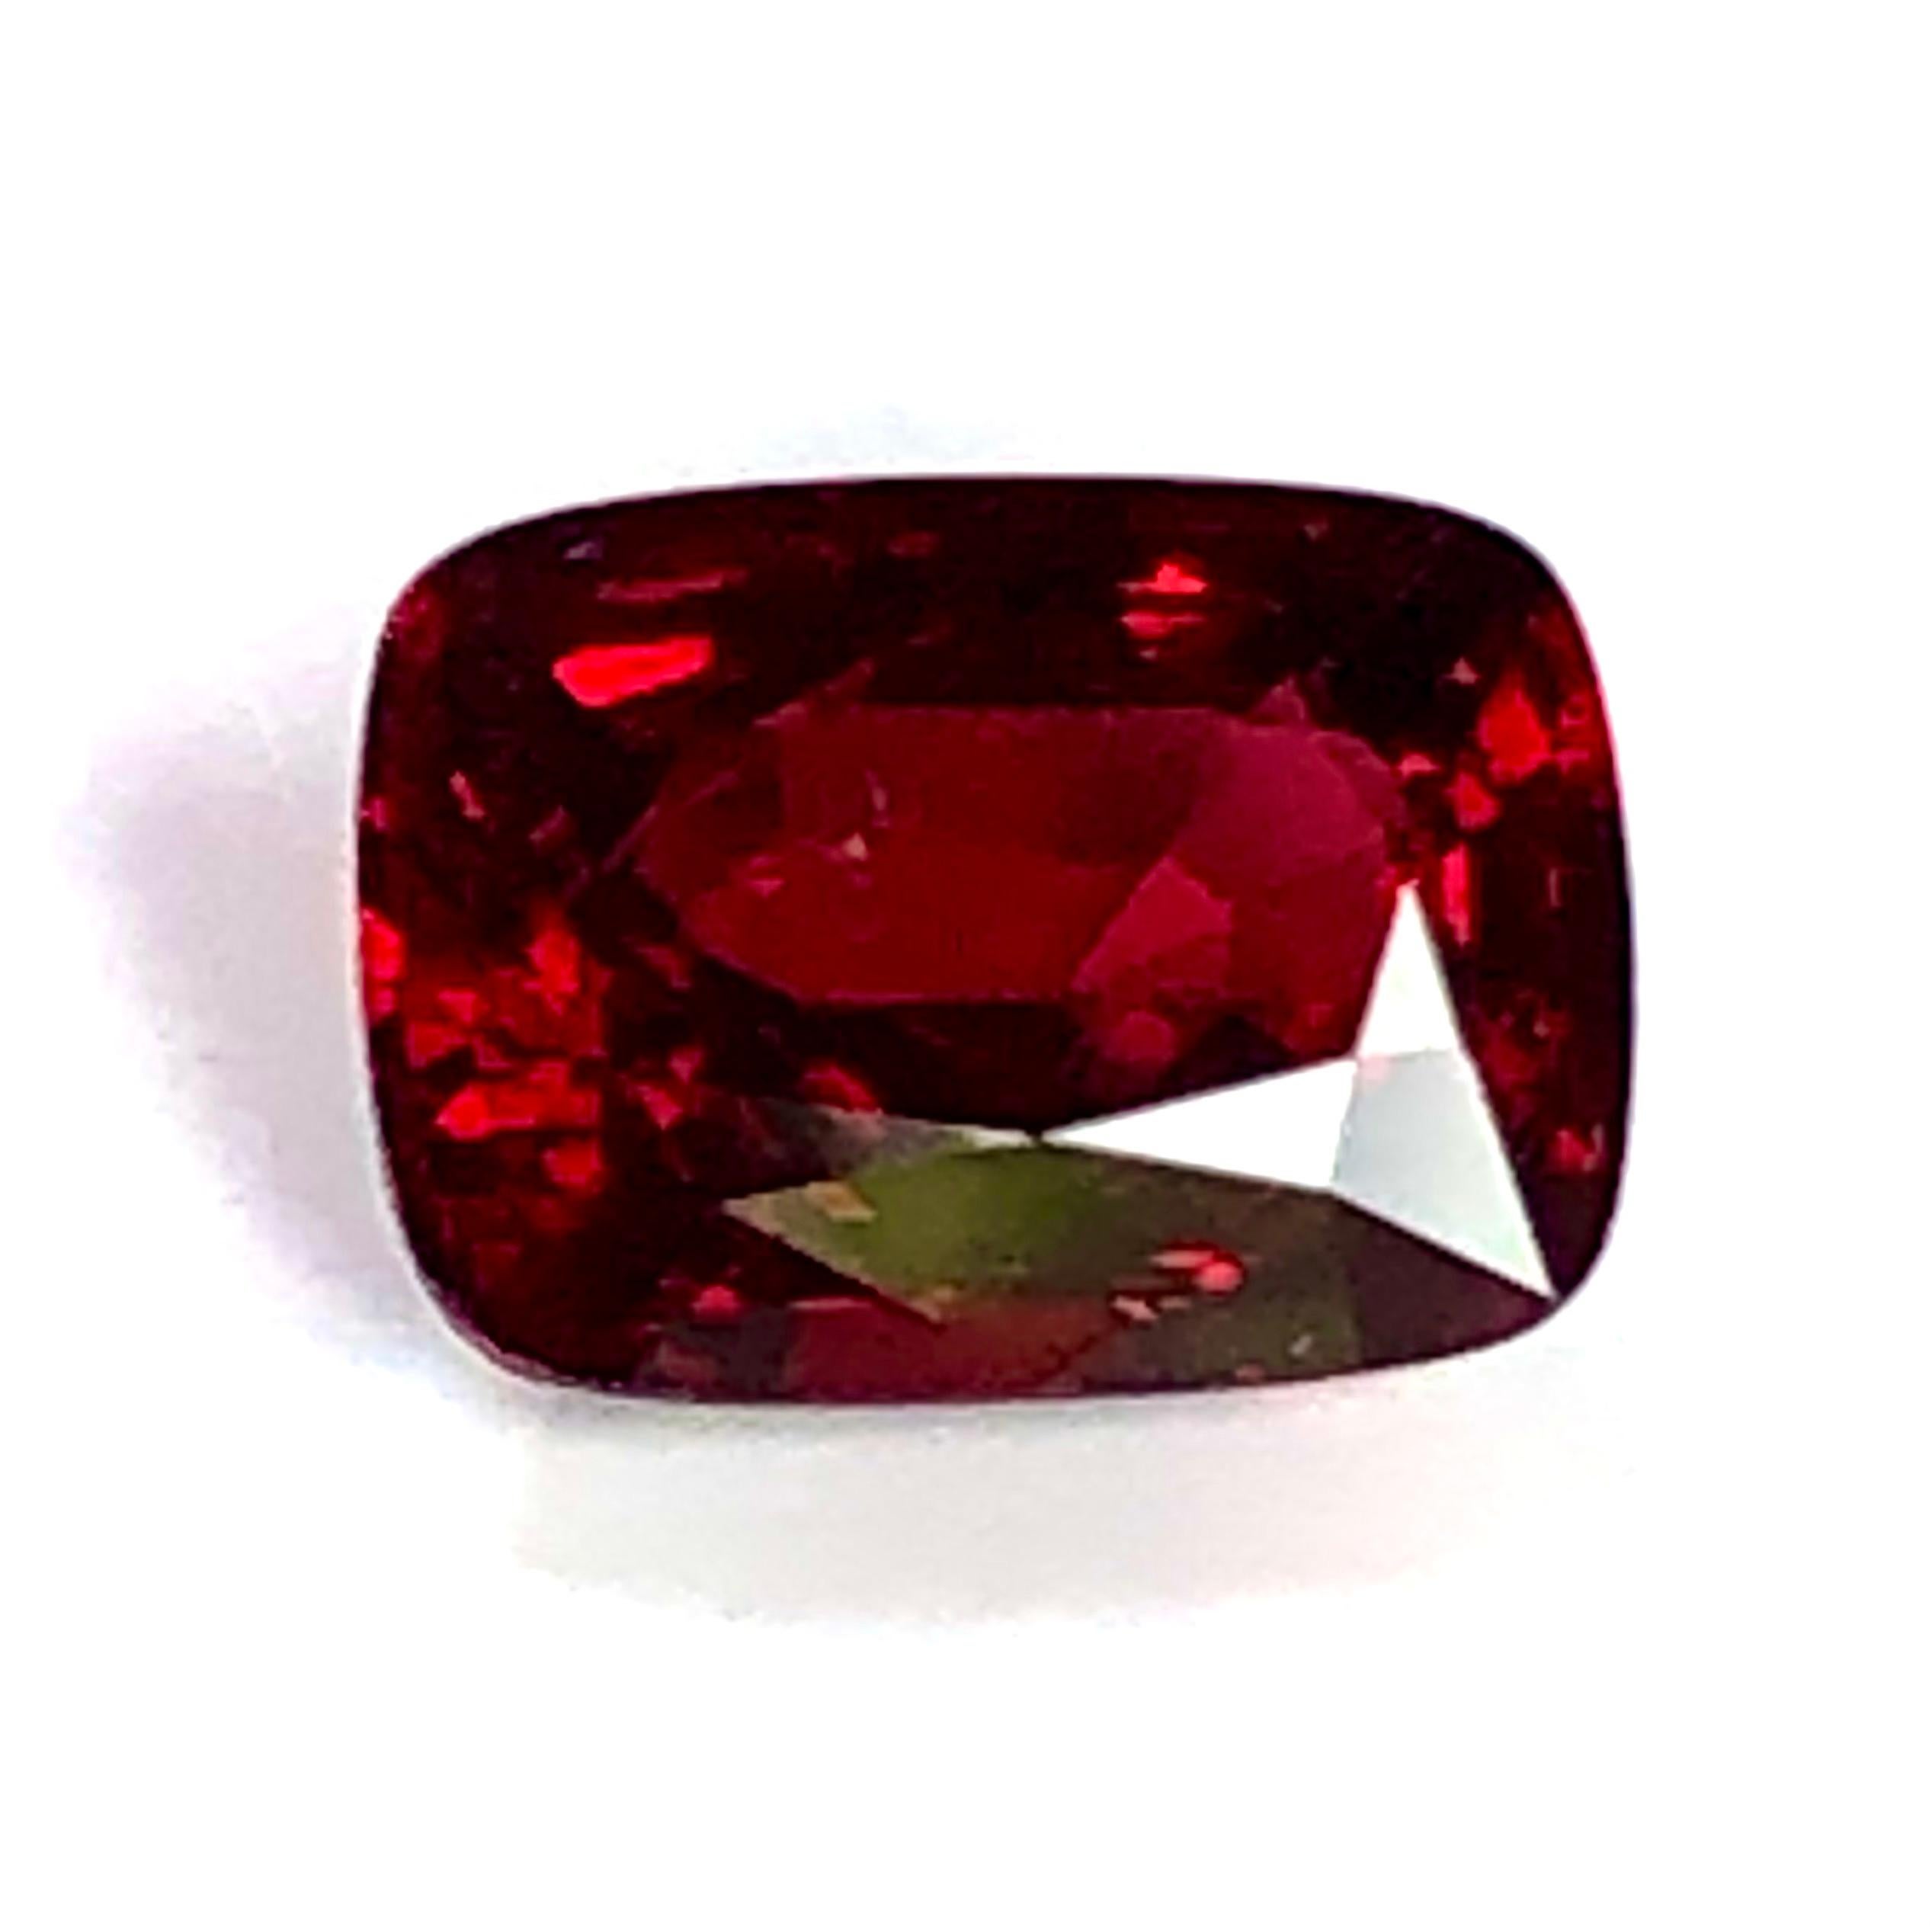 Contemporary 3.14 Carat Red Cushion Cut No Heat Burmese Spinel Certified  For Sale